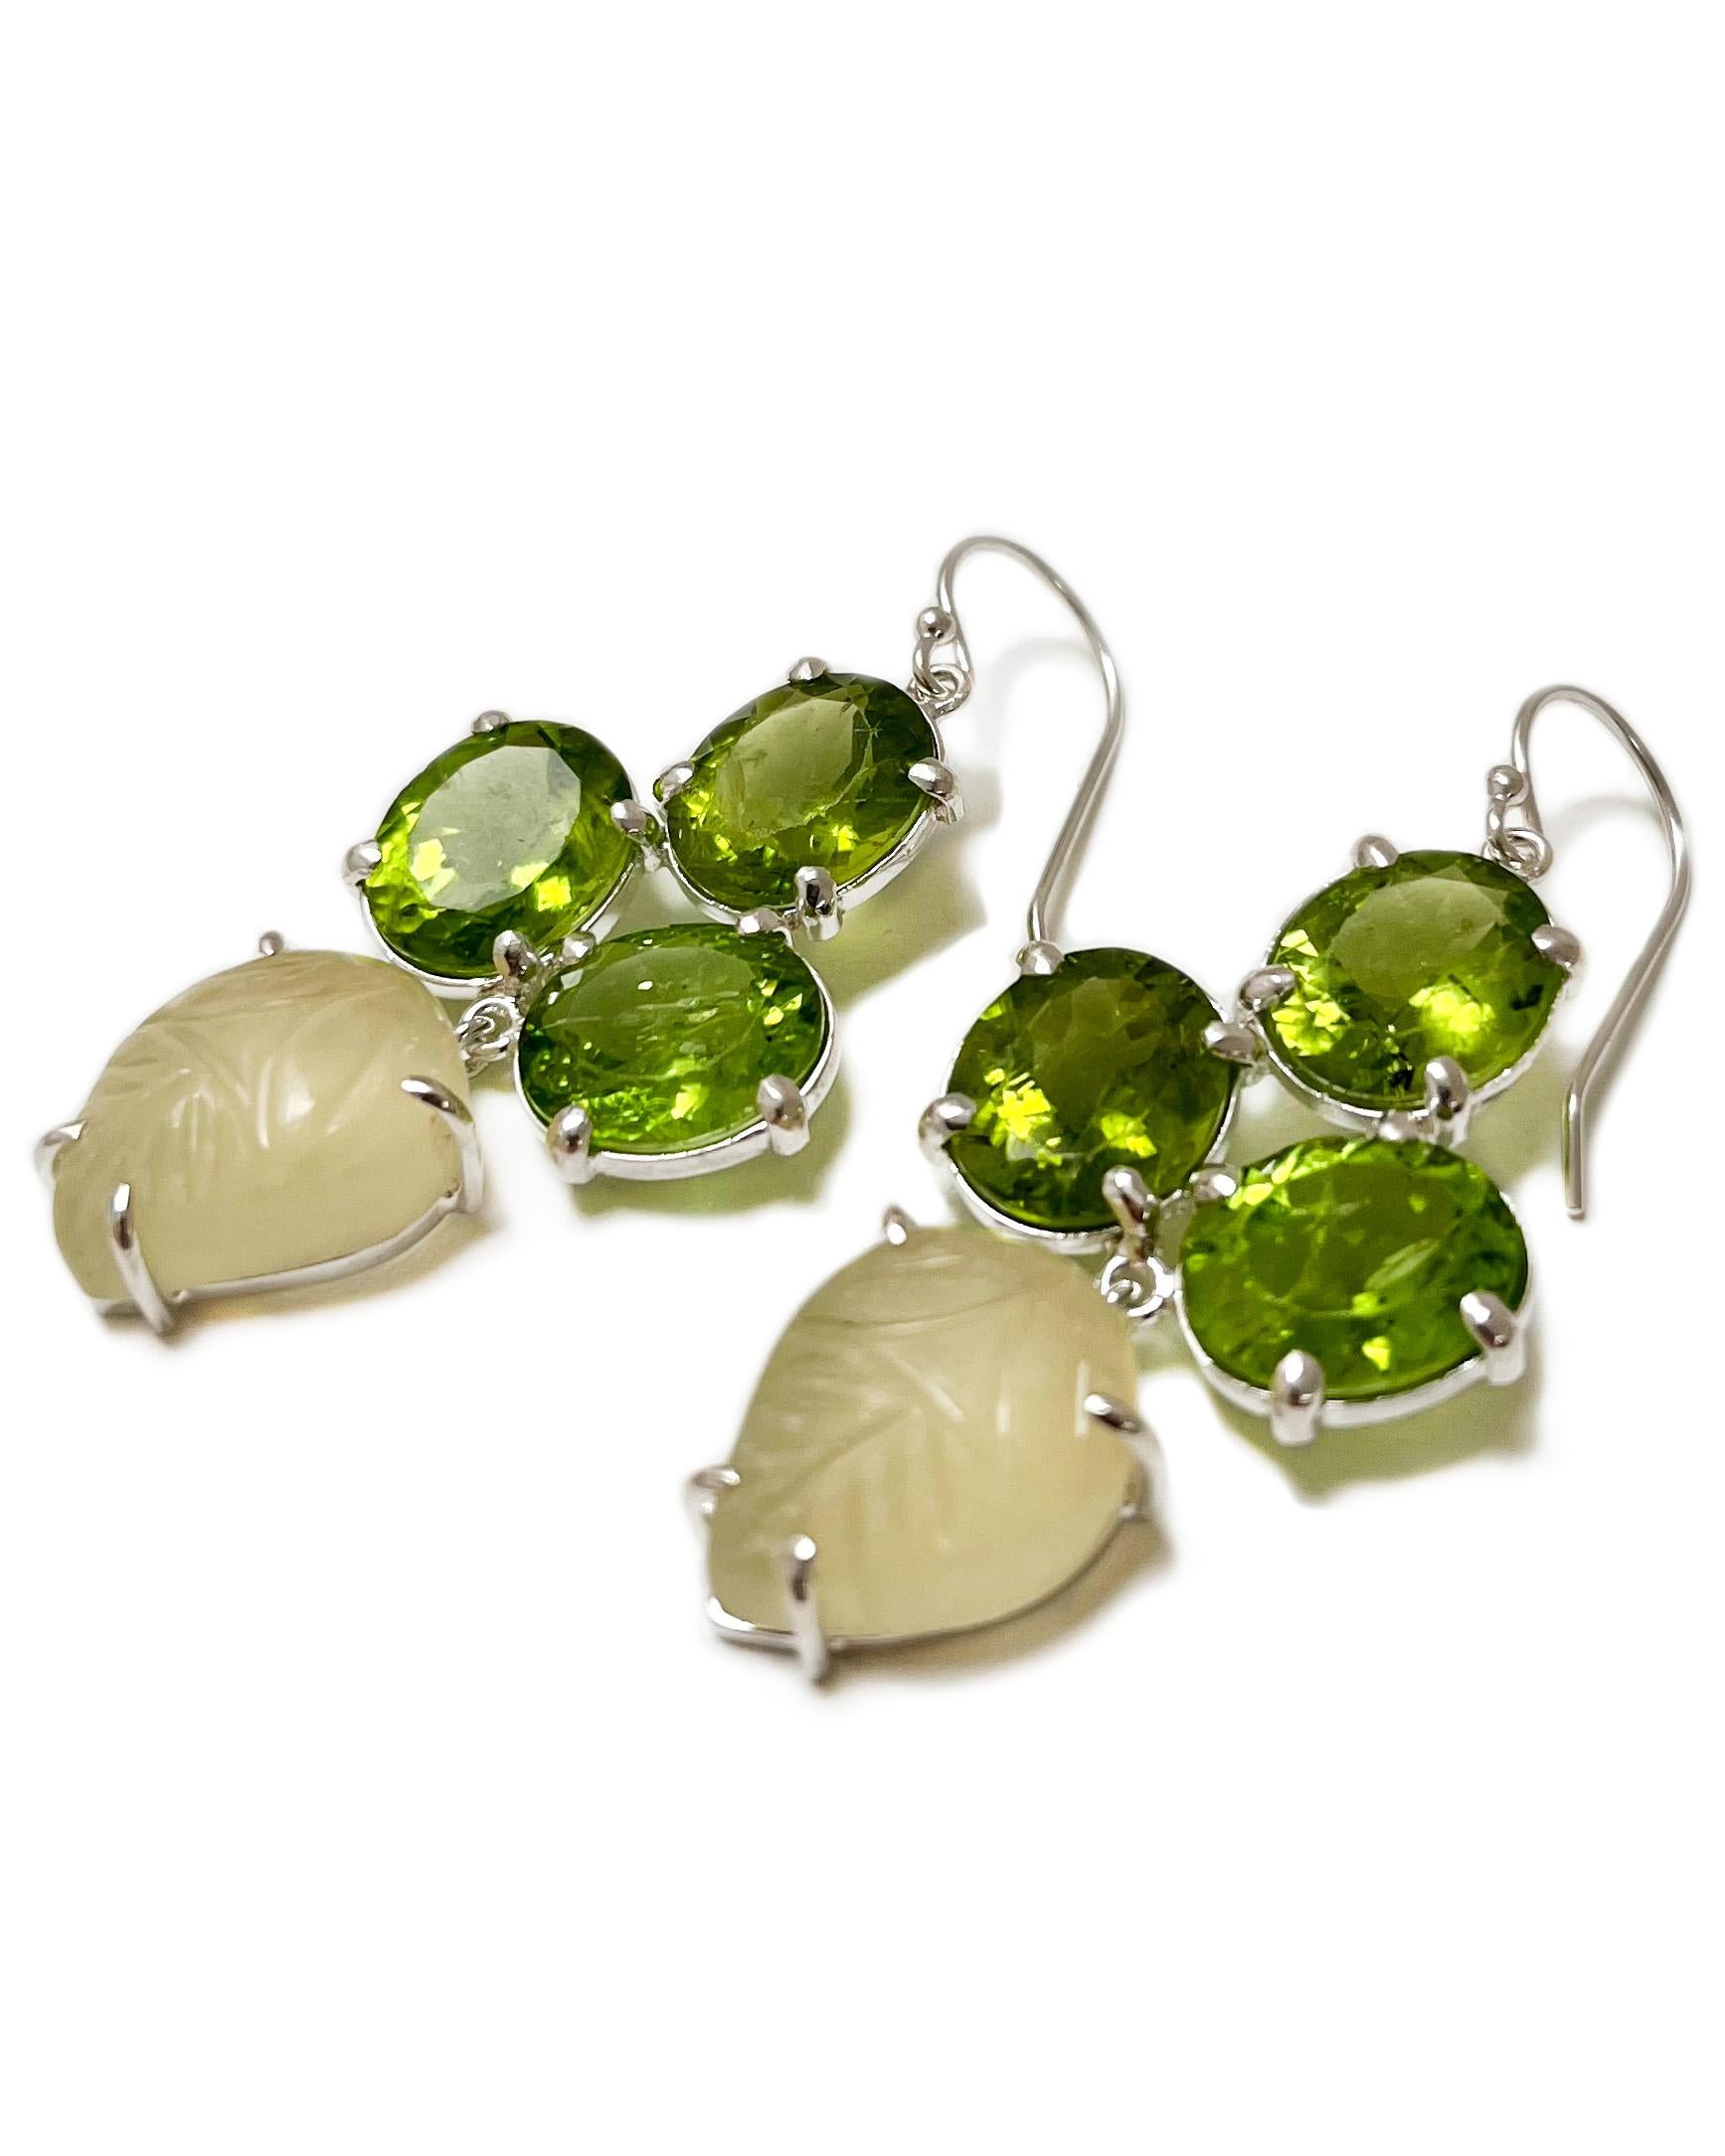 Intention: Lucky Charms

Design: We can't get enough of this bright green peridot color! These dangle earrings are fresh, fun, and will be your new lucky charms. 

Style Suggestion: ﻿Wear these with a stack of shiny silver rings. 

Particulars: